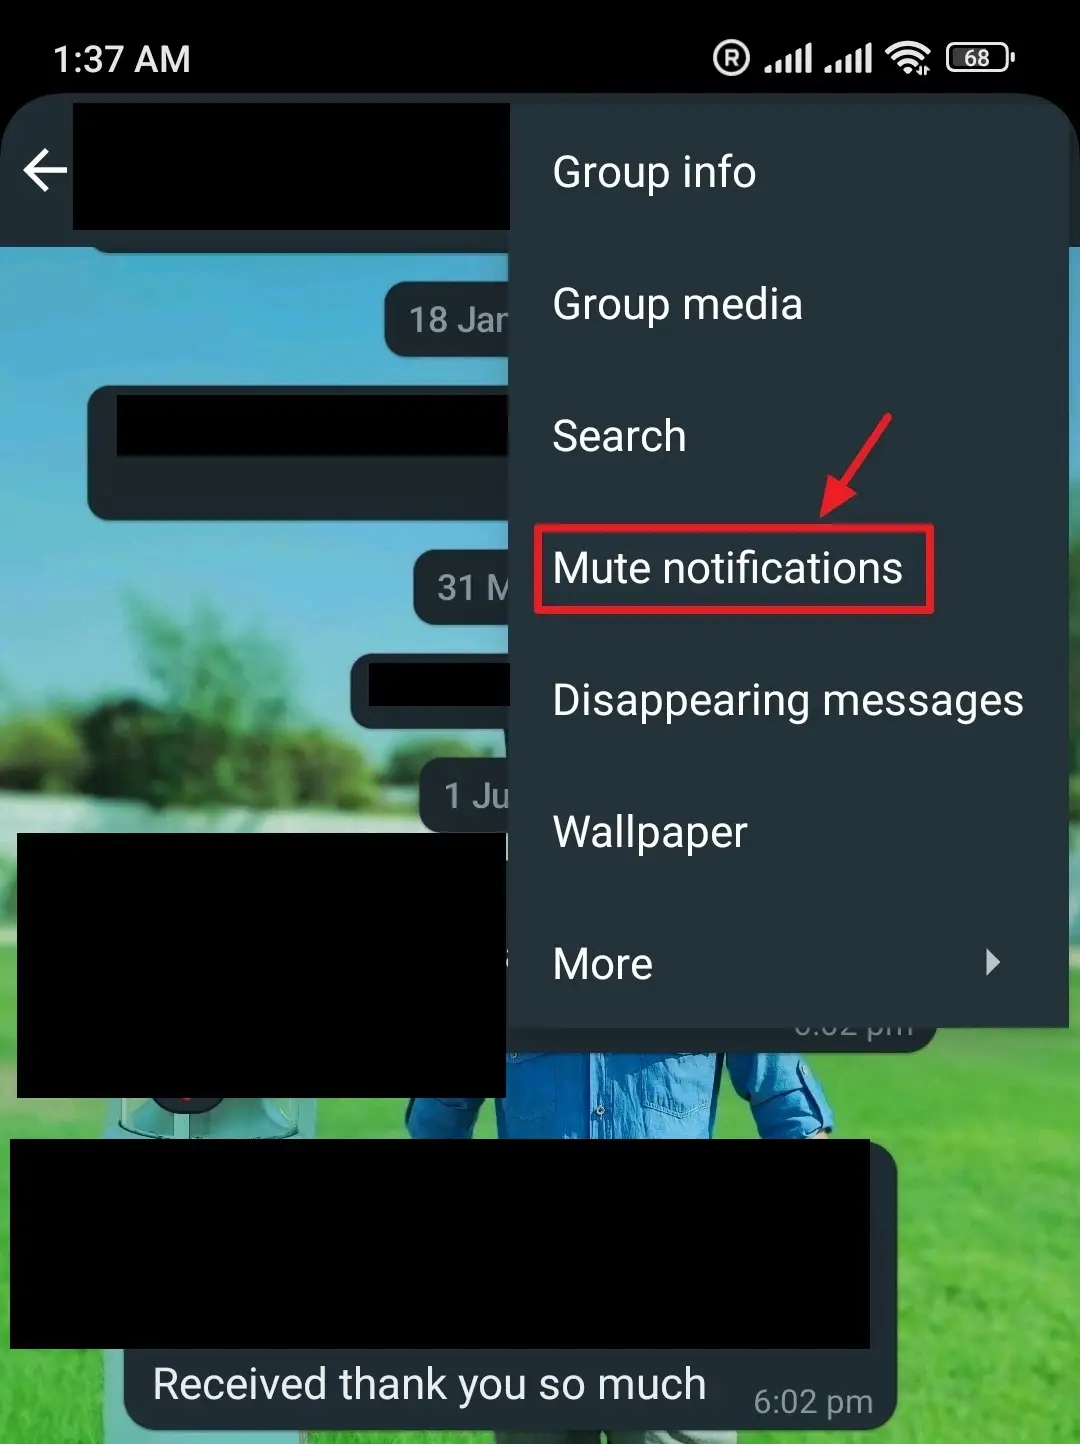 Tap on the Mute notifications.